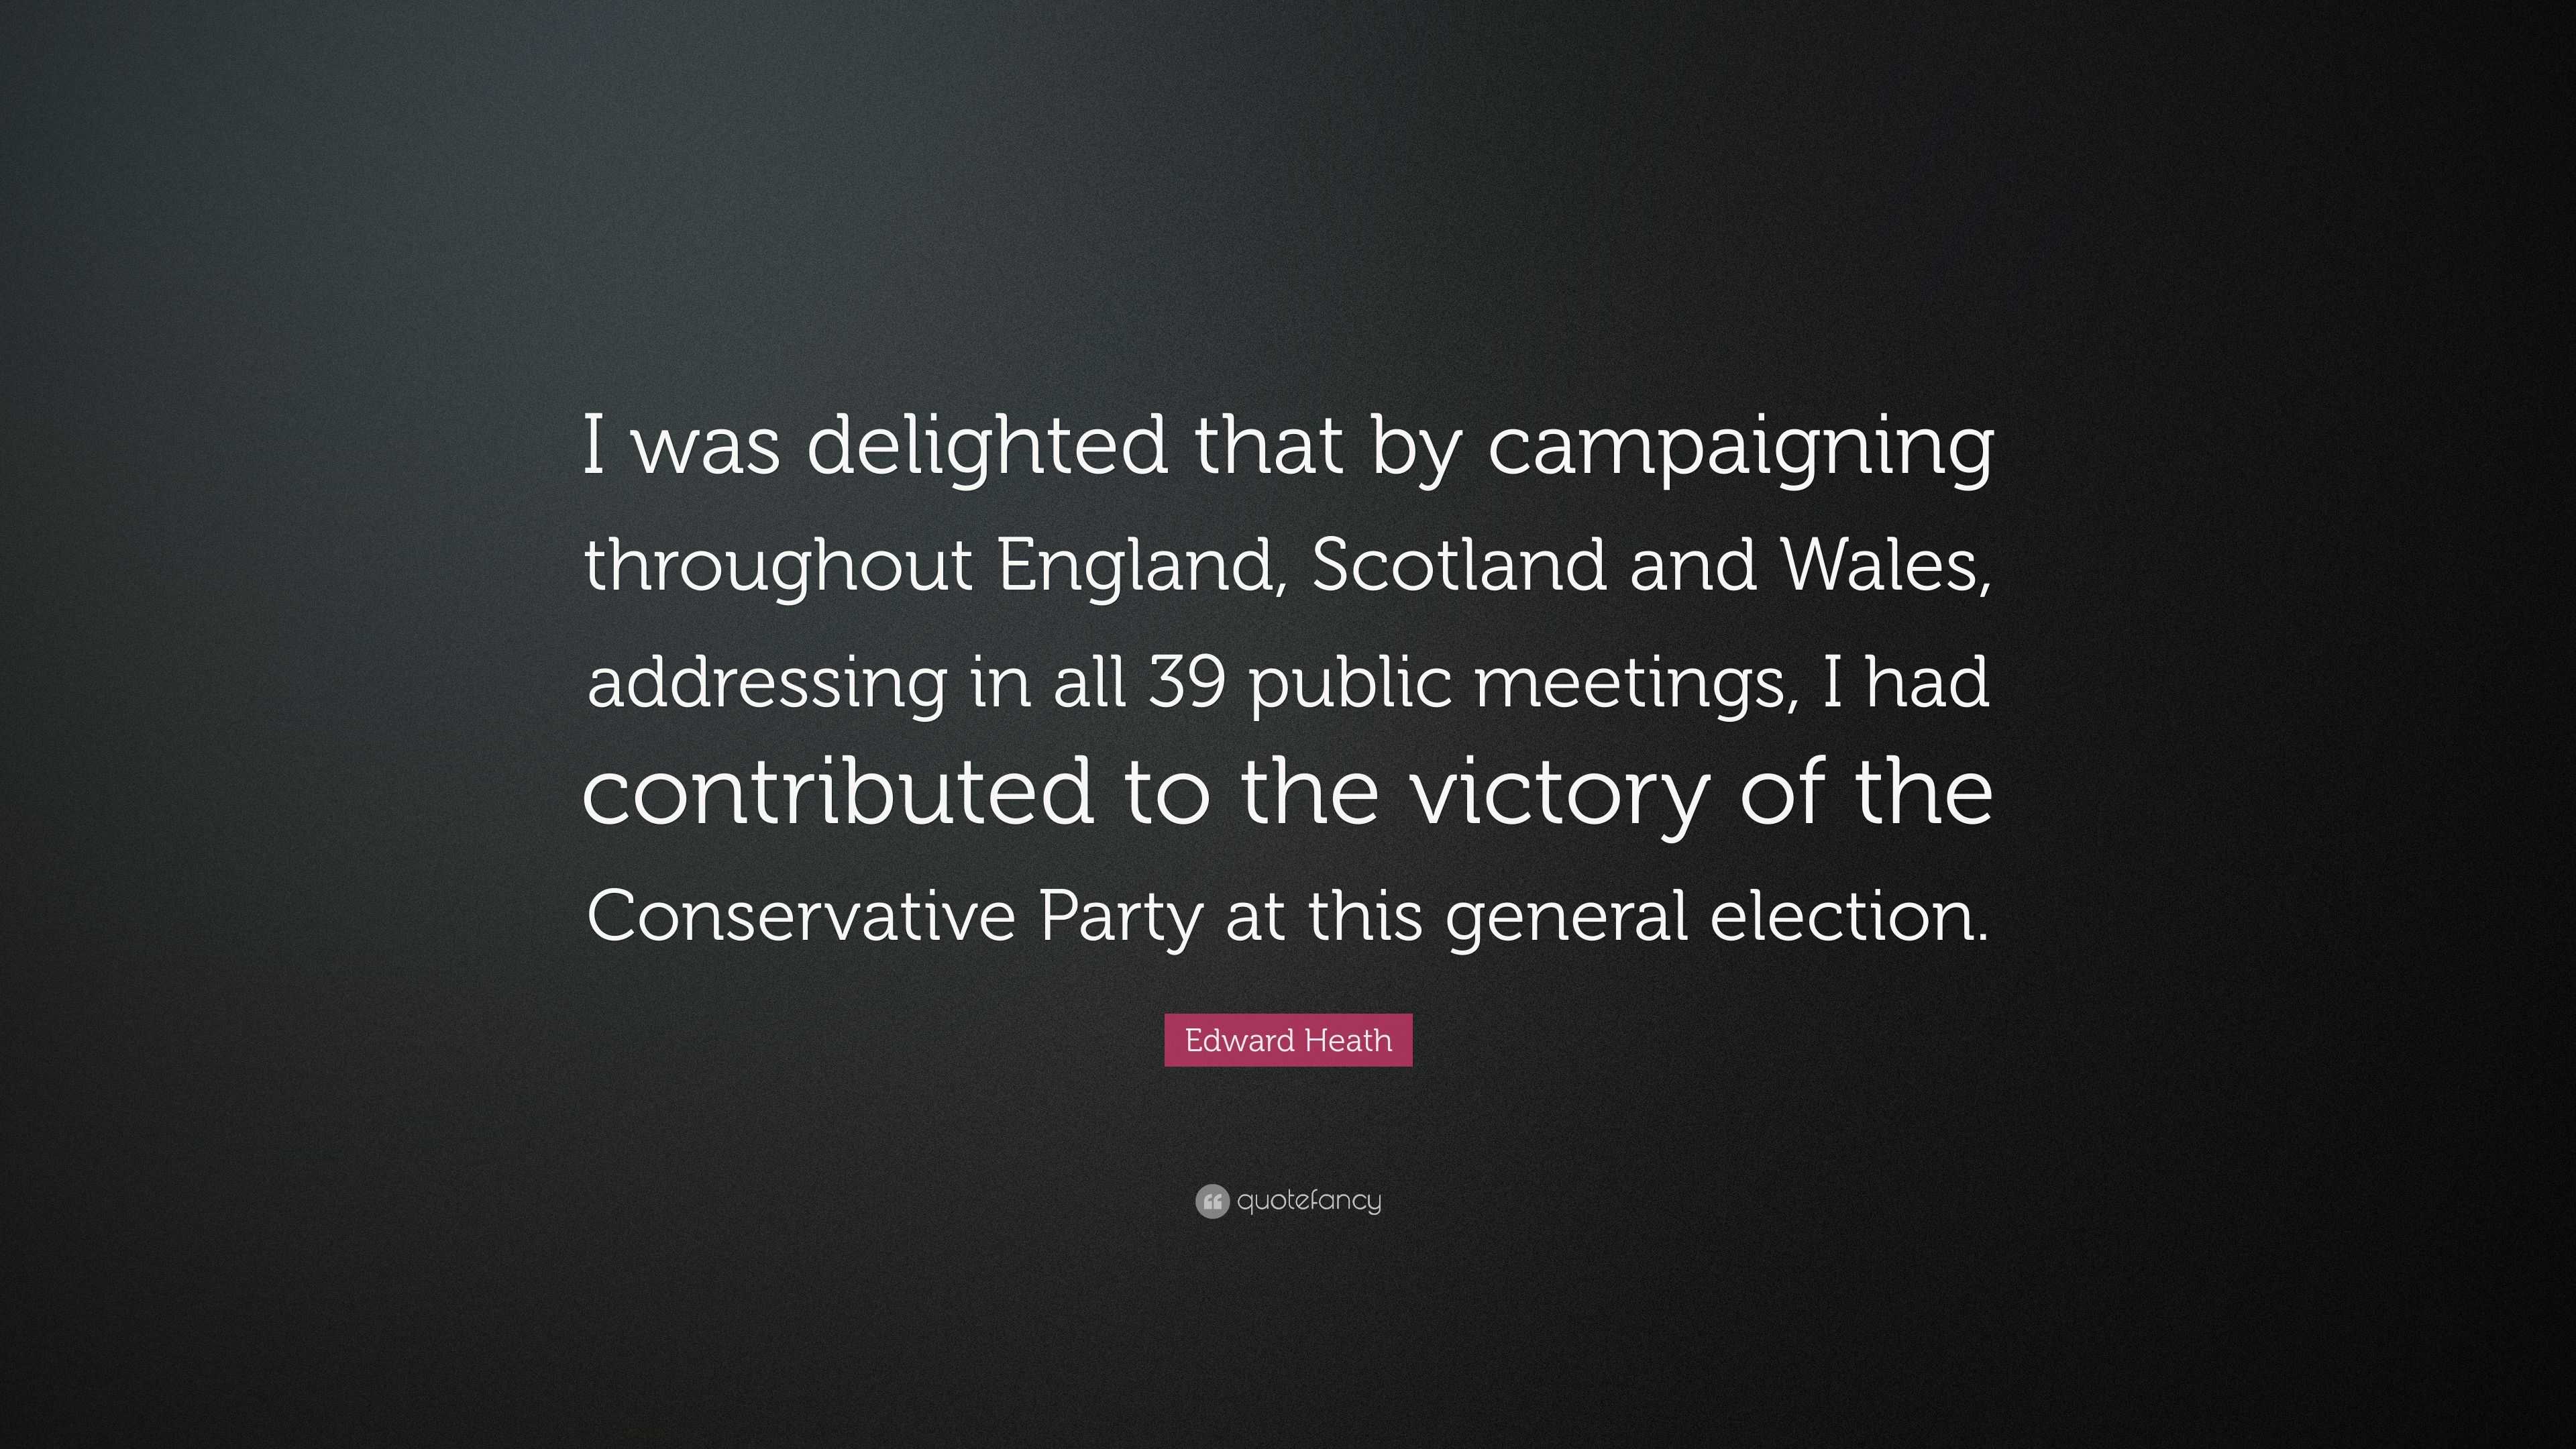 Edward Heath Quote: “I was delighted that by campaigning throughout